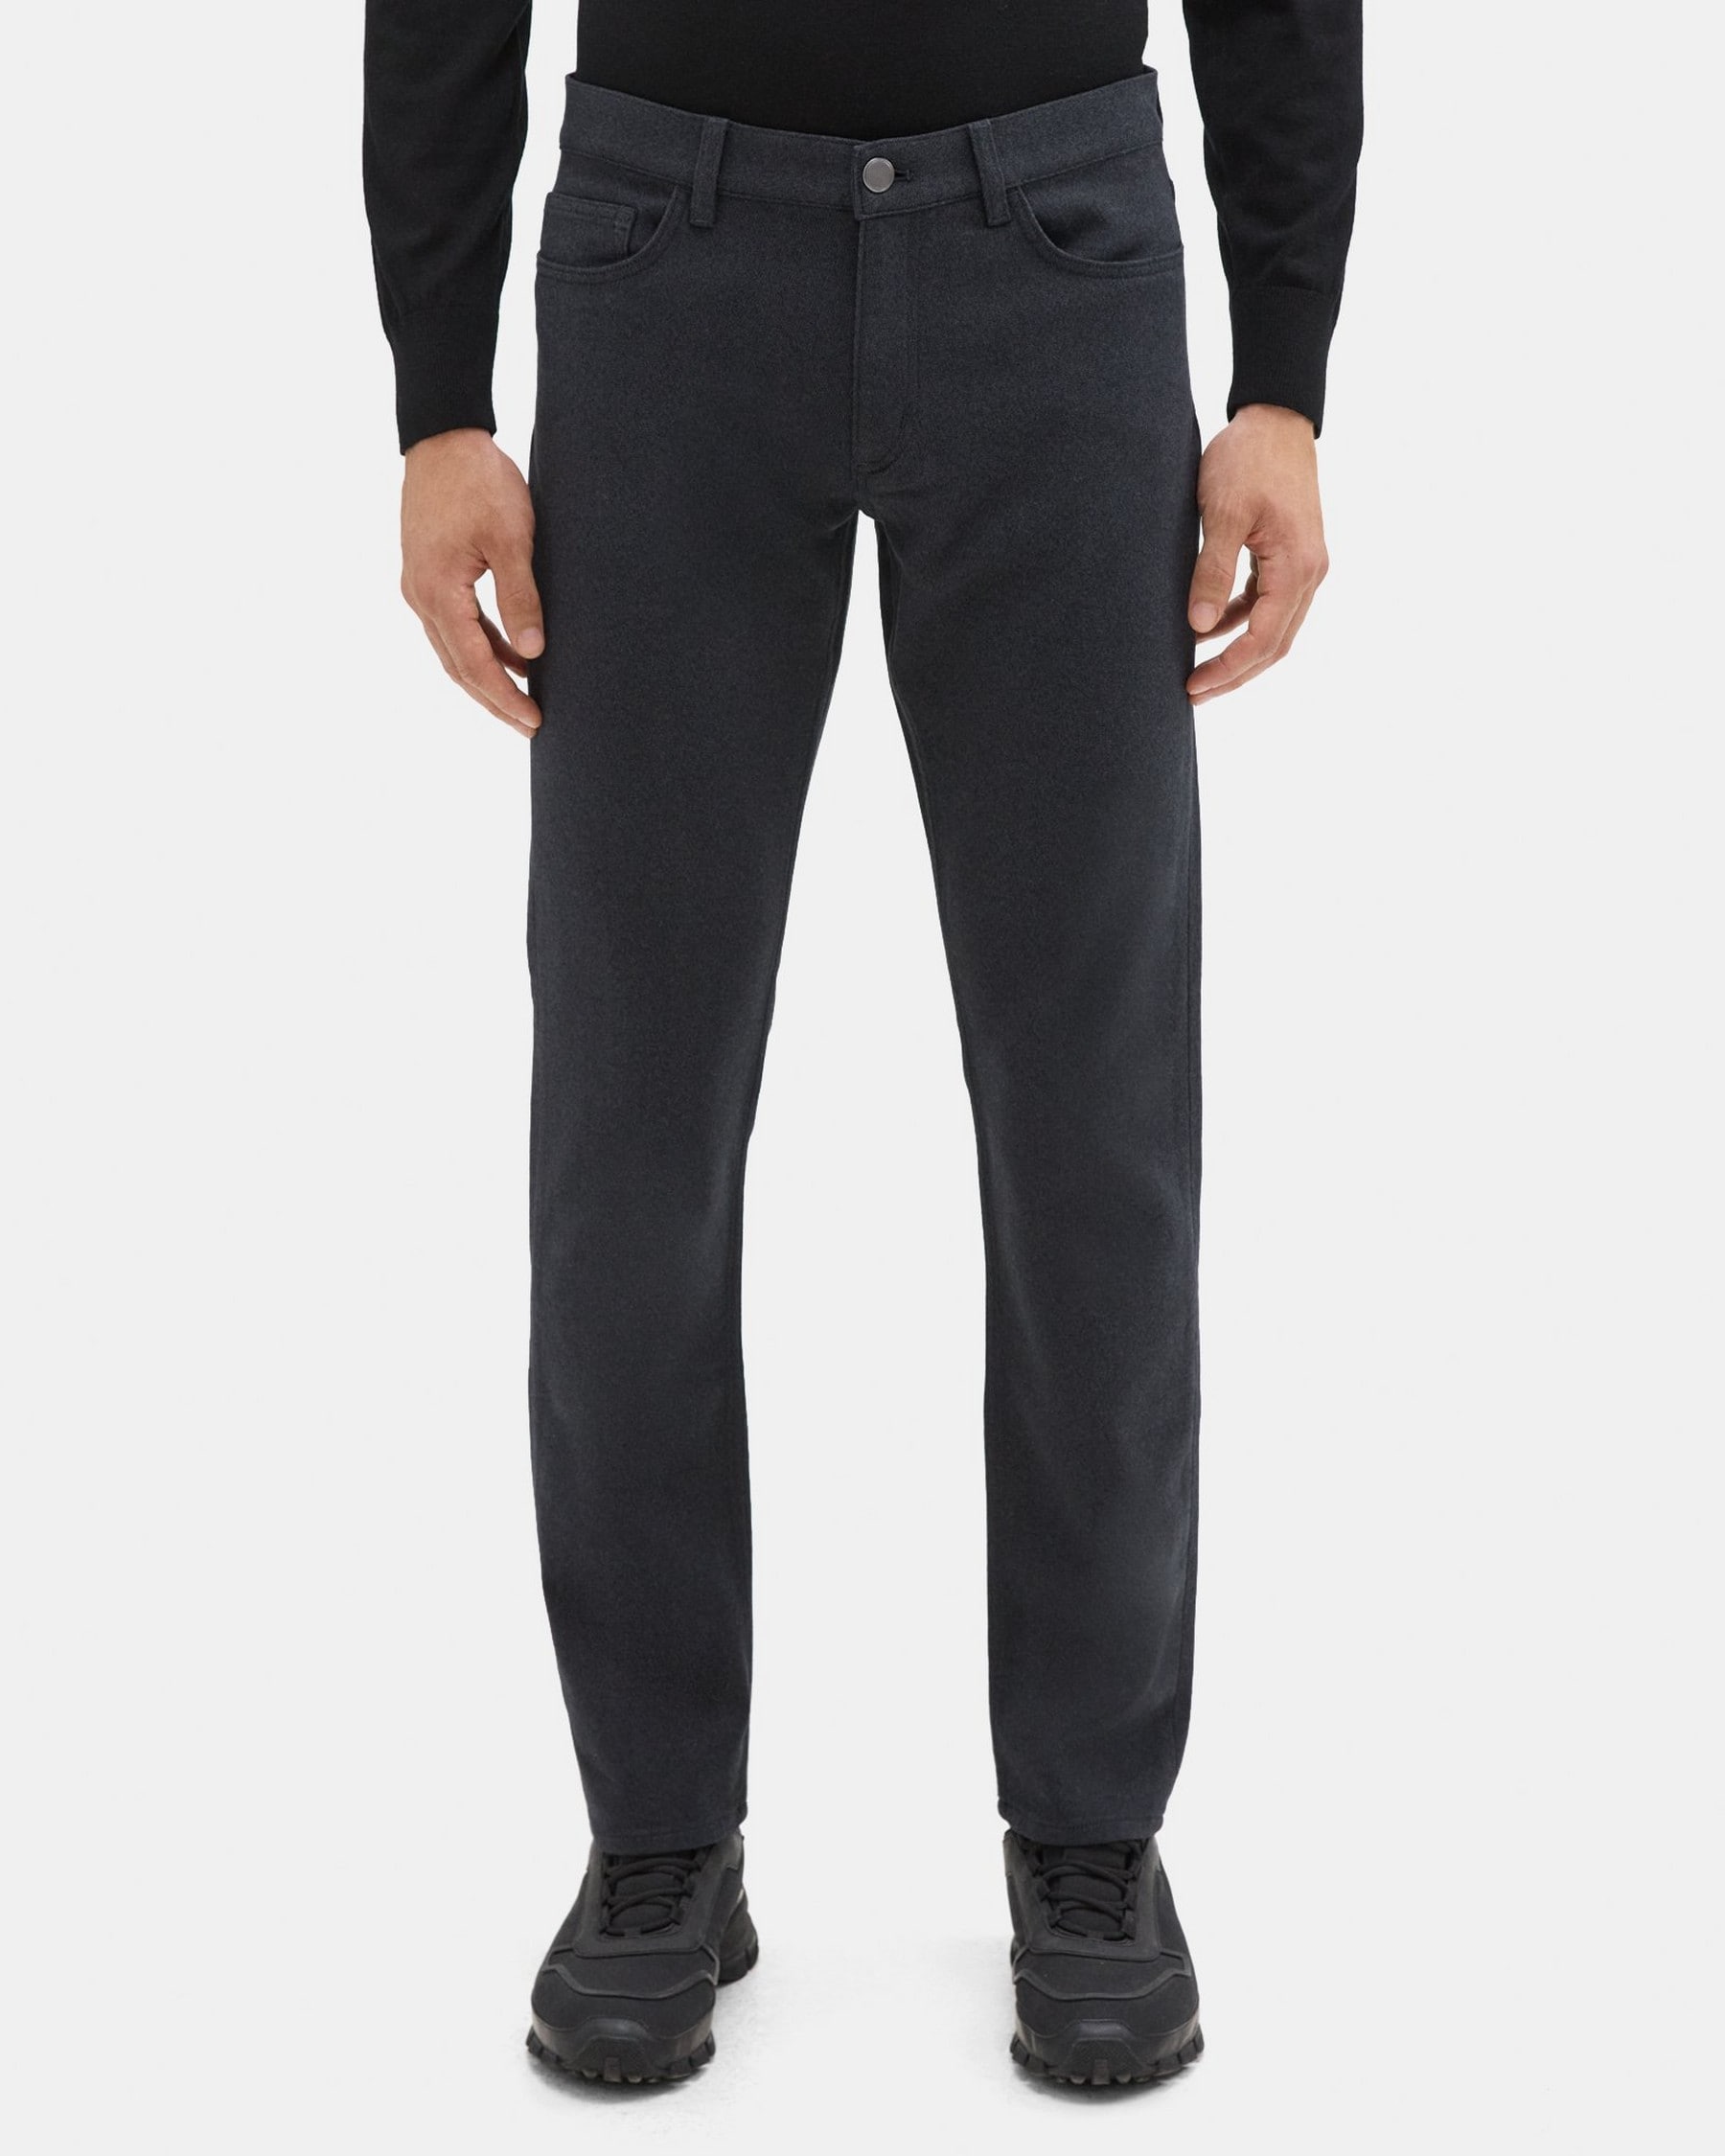 Theory Five-Pocket Pant in Stretch Cotton Twill